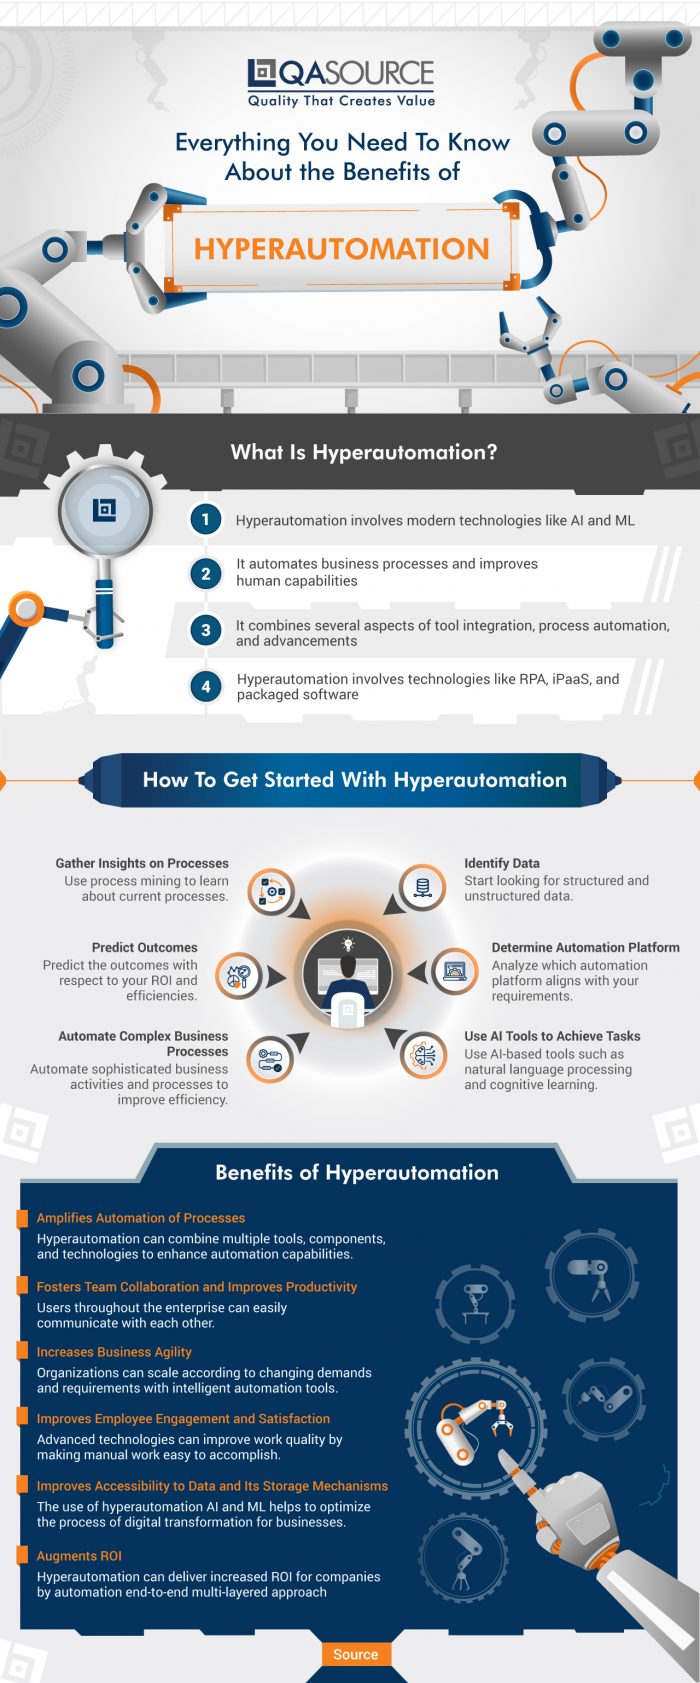 Everything You Need To Know About the Benefits of Hyperautomation